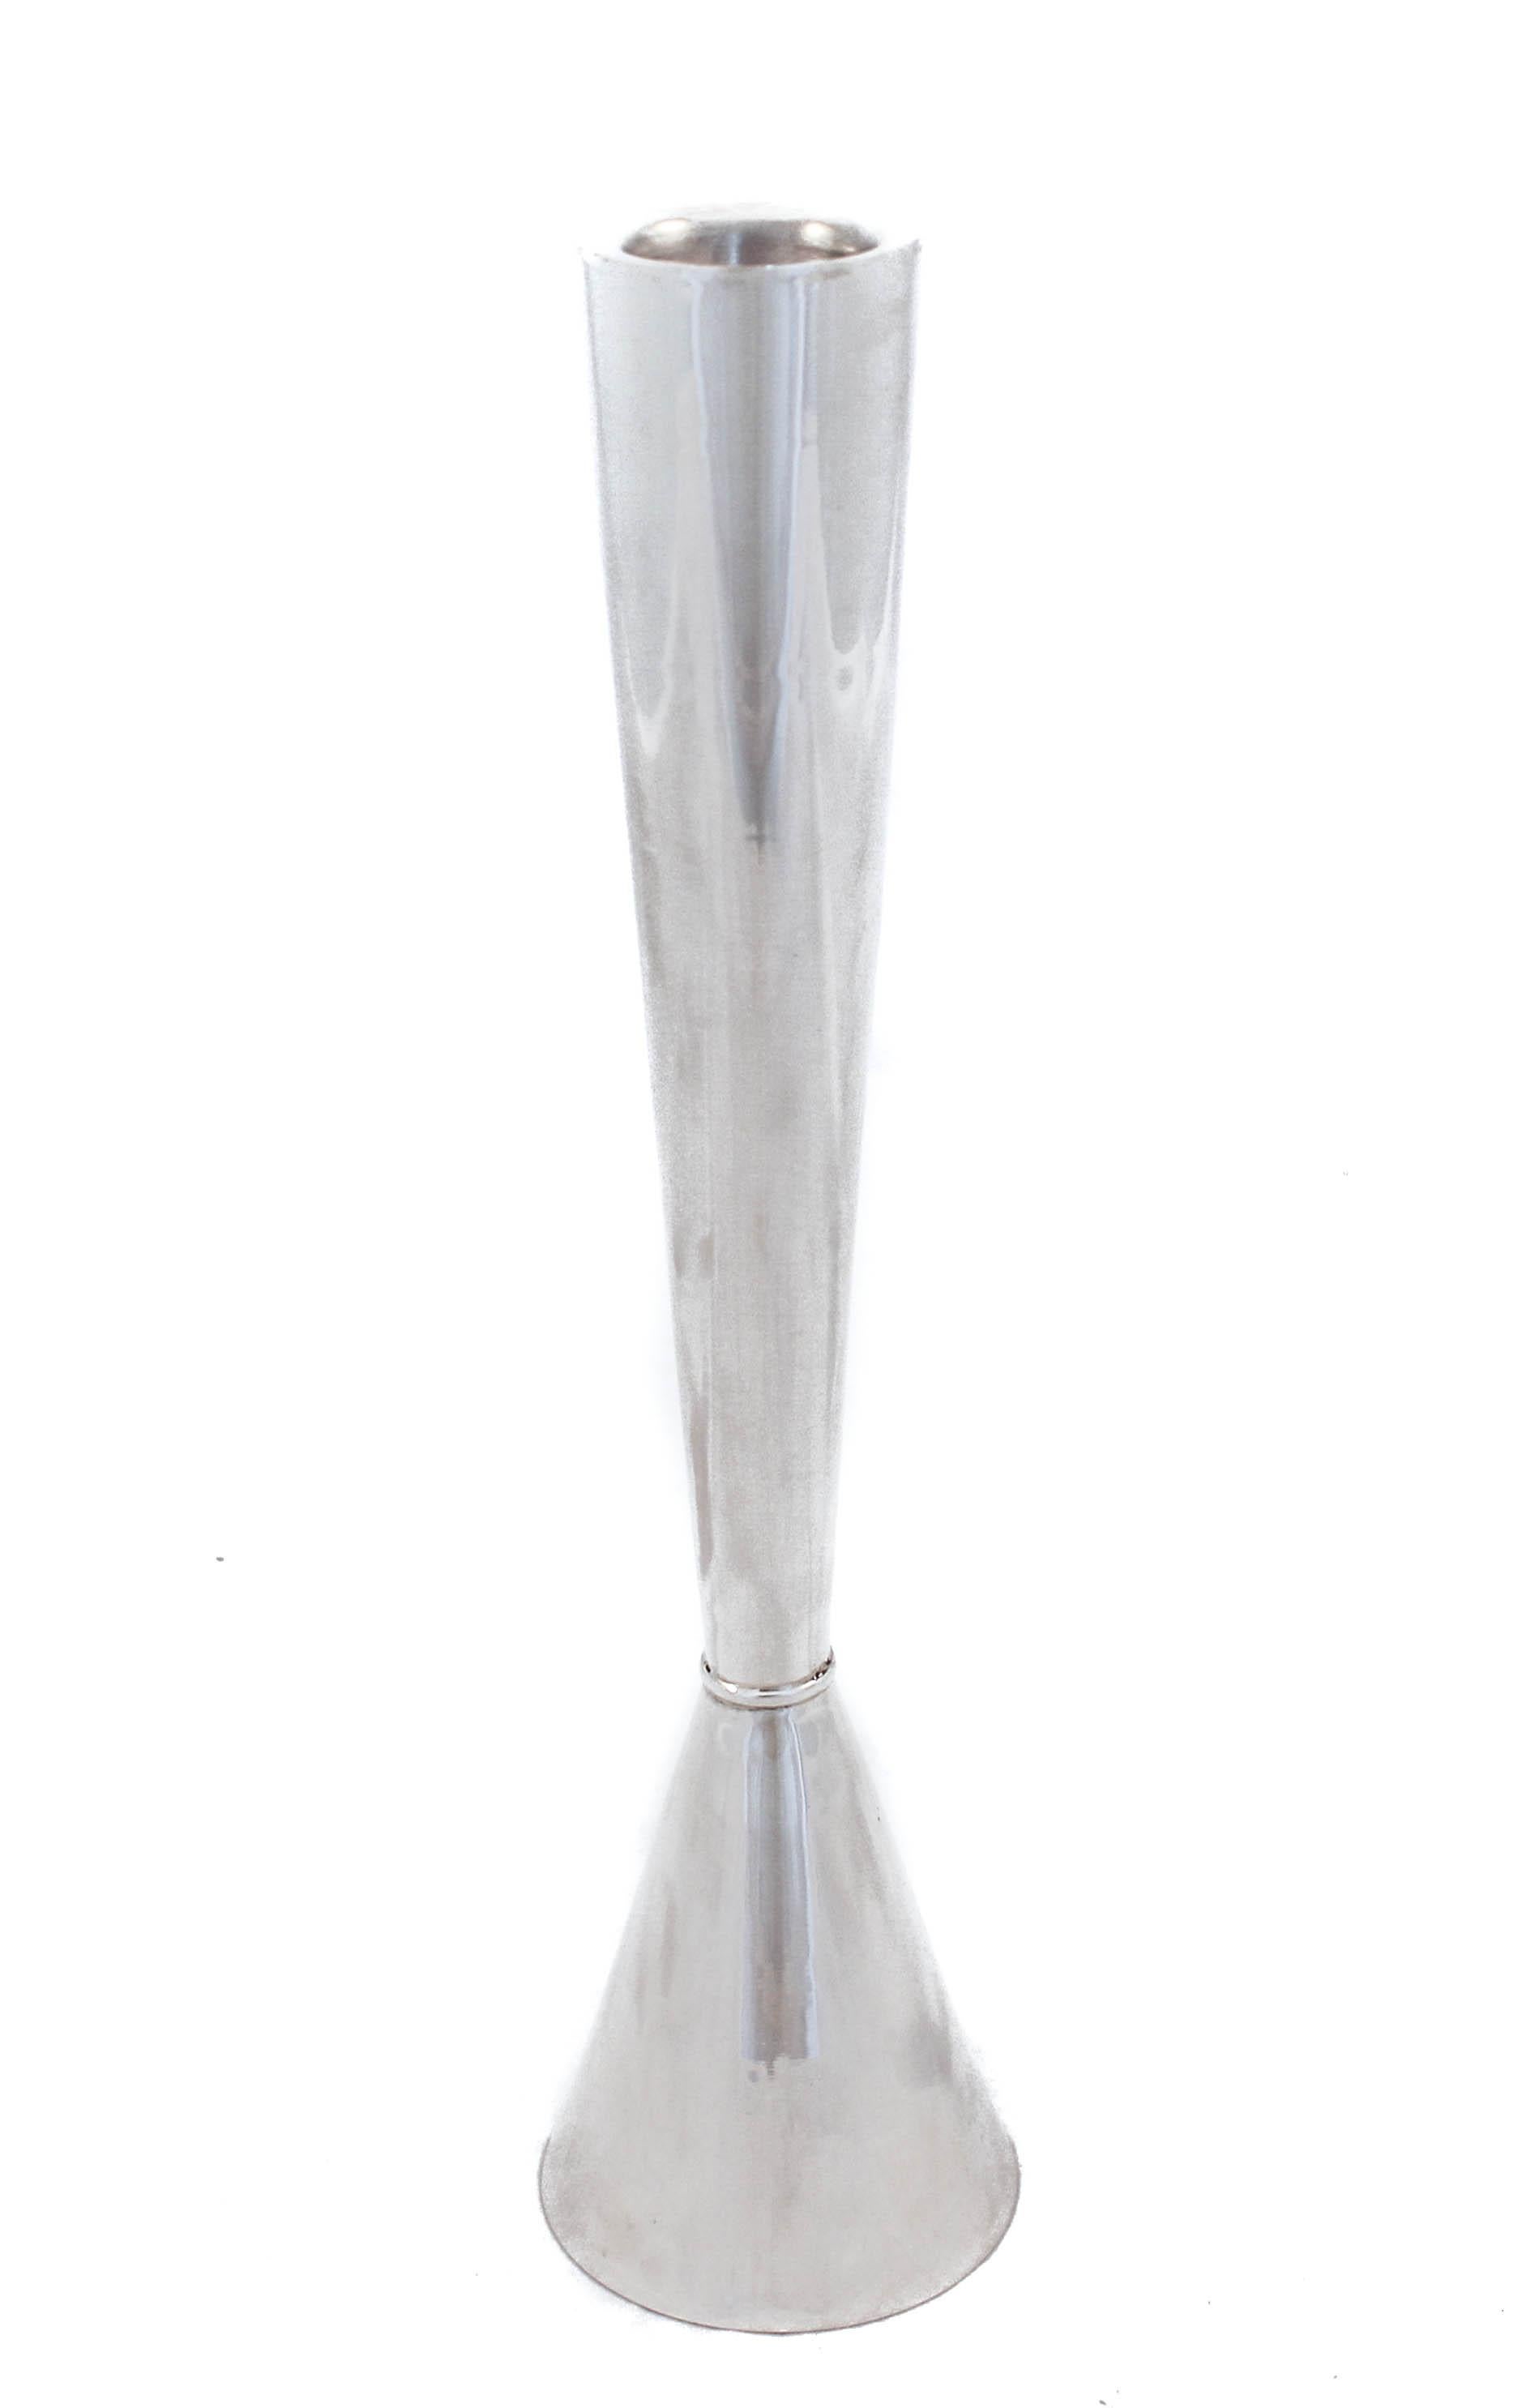 Being offered is a pair of new sterling silver candlesticks. They are uber-modern and sleek and will look gorgeous in a contemporary setting. They have a cone shape and are not weighted. Perfect for a young newlywed couple.